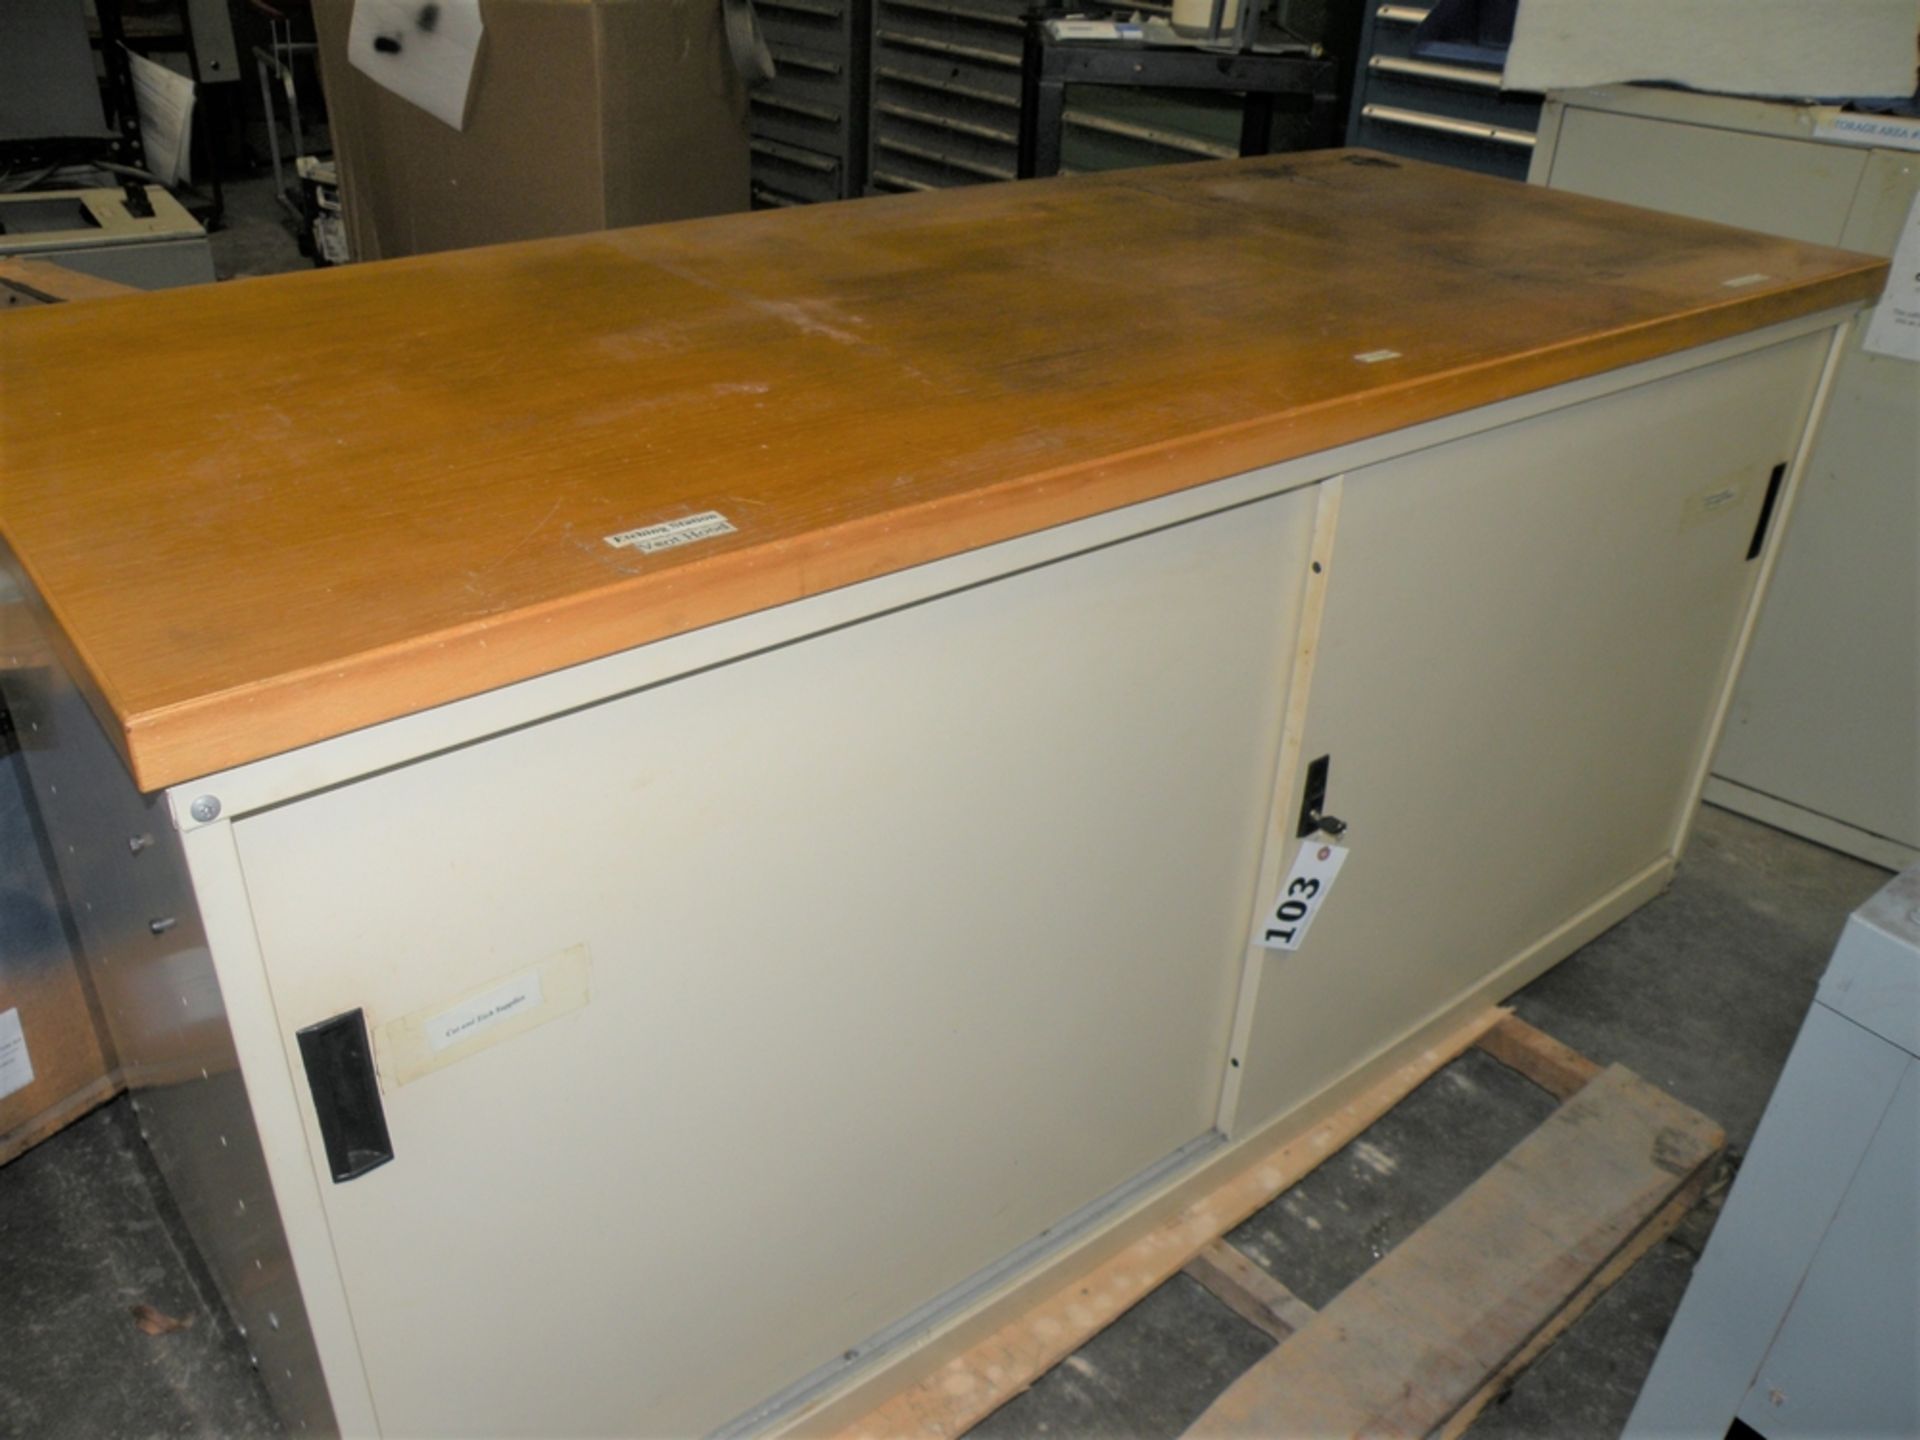 Nice 30" x 72" Metal Cabinet with Wood Top, Sliding Doors, Shelf inside, with Lock and Key